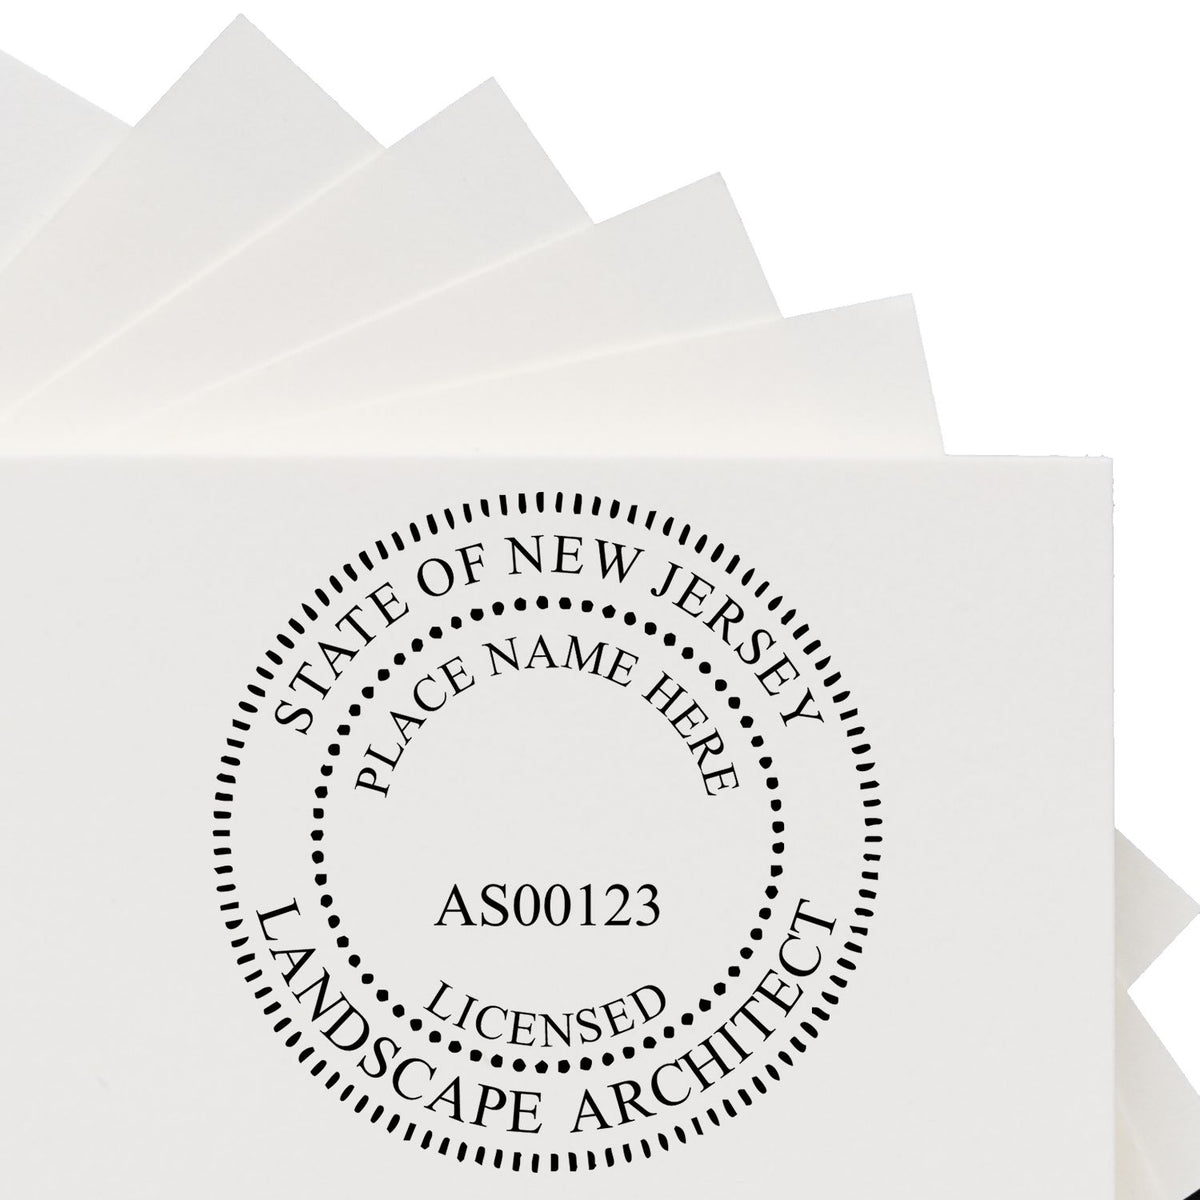 This paper is stamped with a sample imprint of the New Jersey Landscape Architectural Seal Stamp, signifying its quality and reliability.